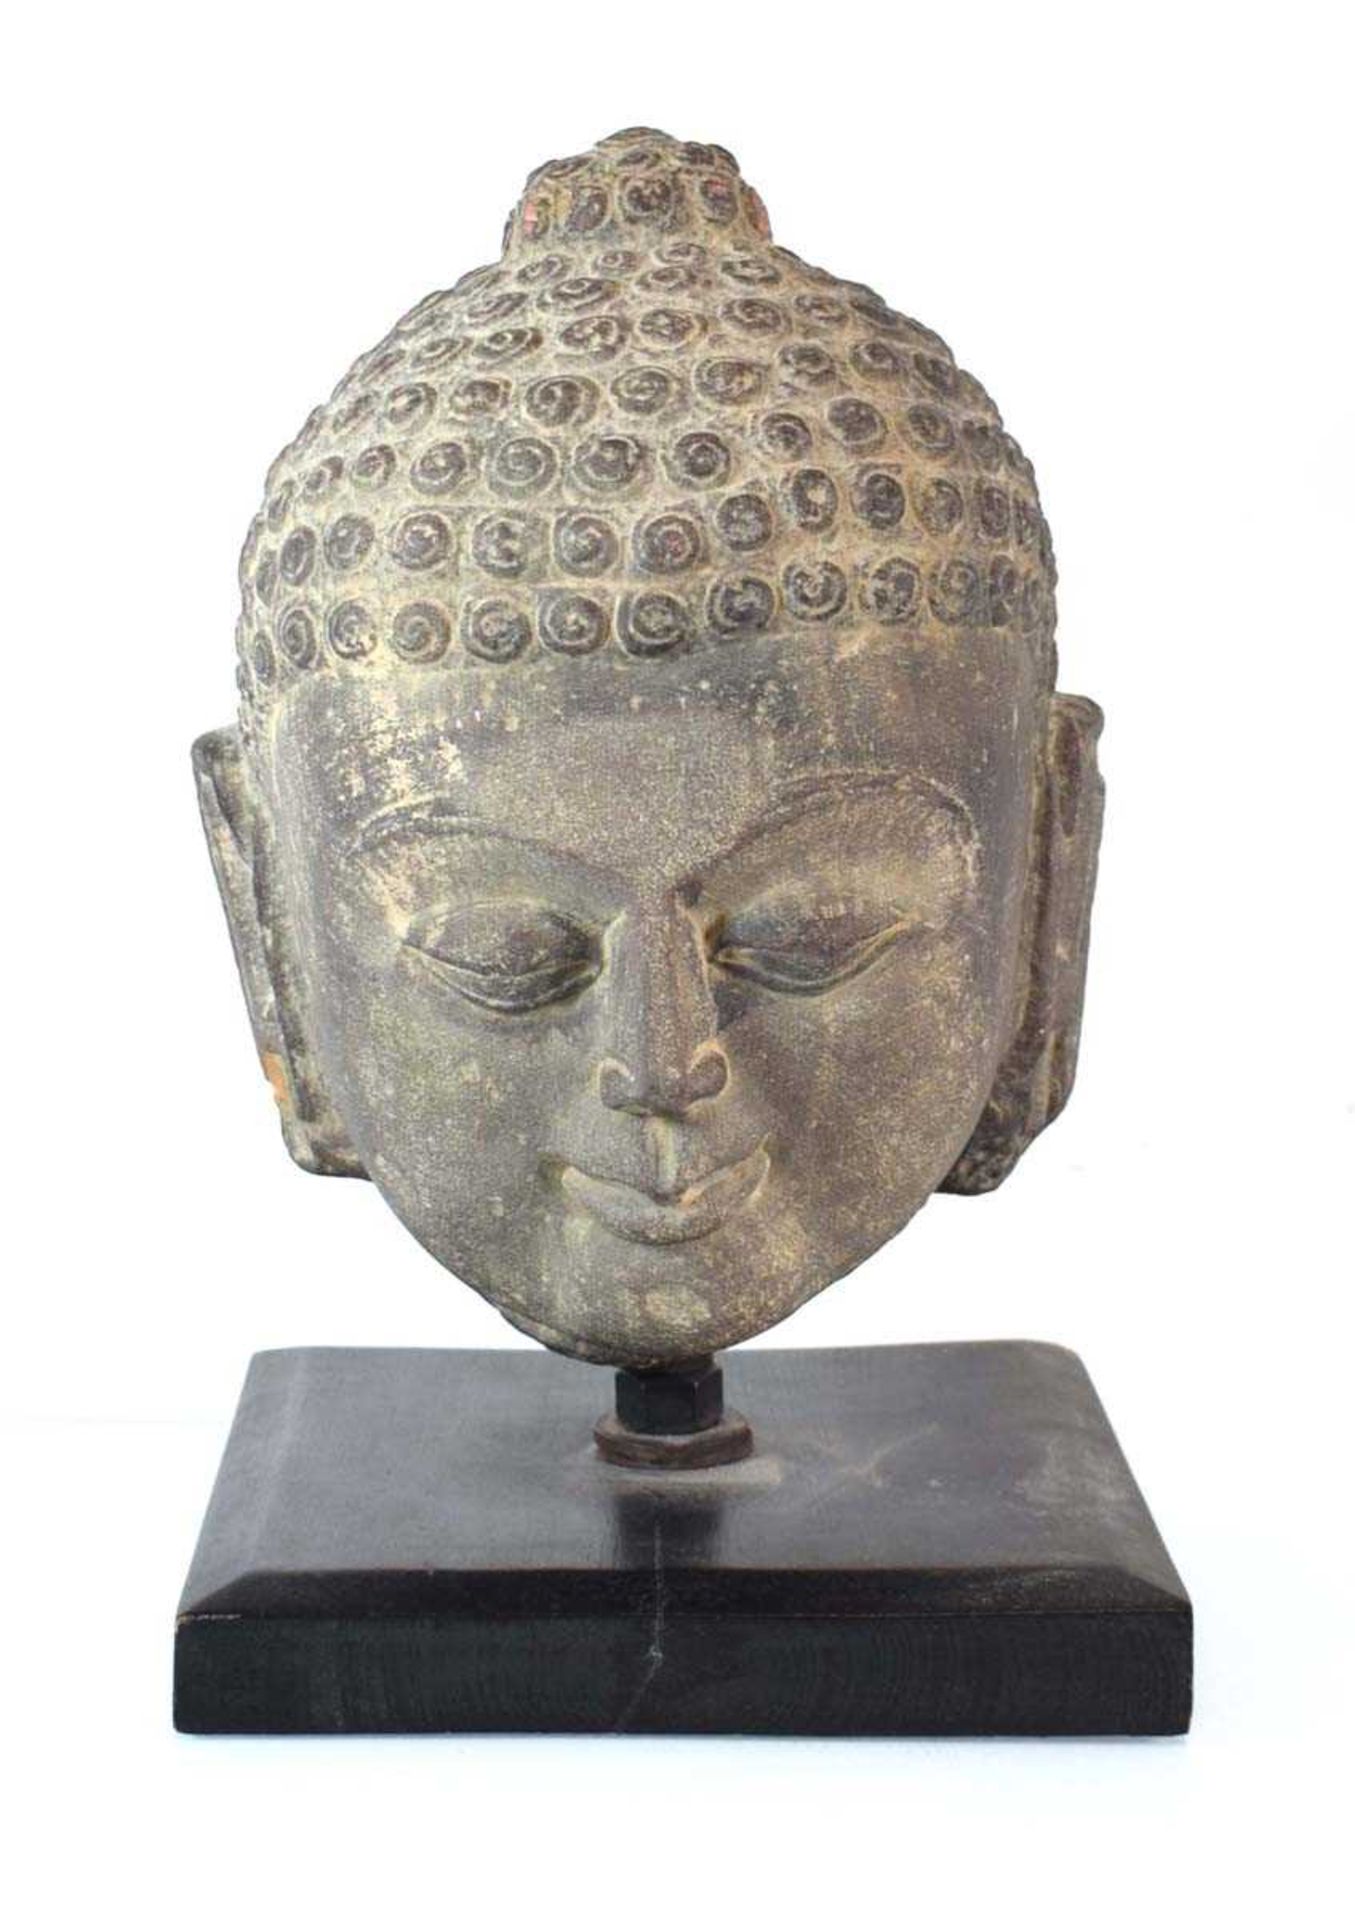 A stoneware figure modelled as the Buddhas head, h. 38.5 cm, including stand *from the collection of